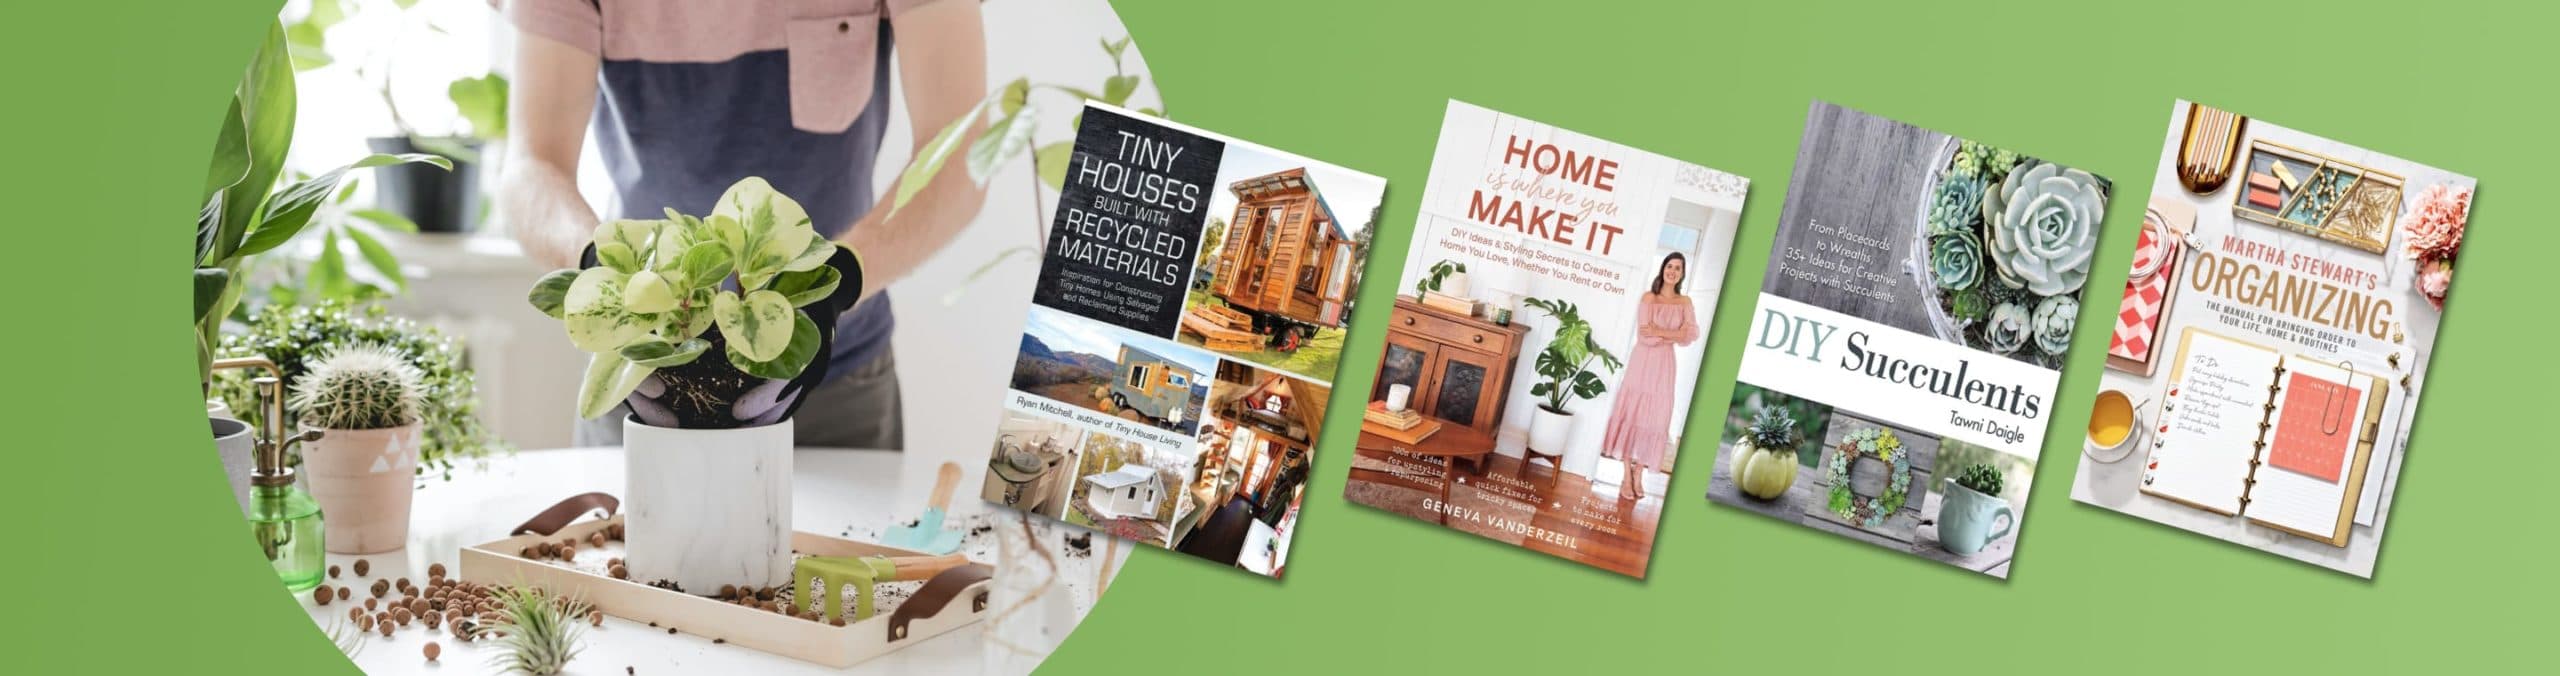 16 DIY guides for every project under the sun